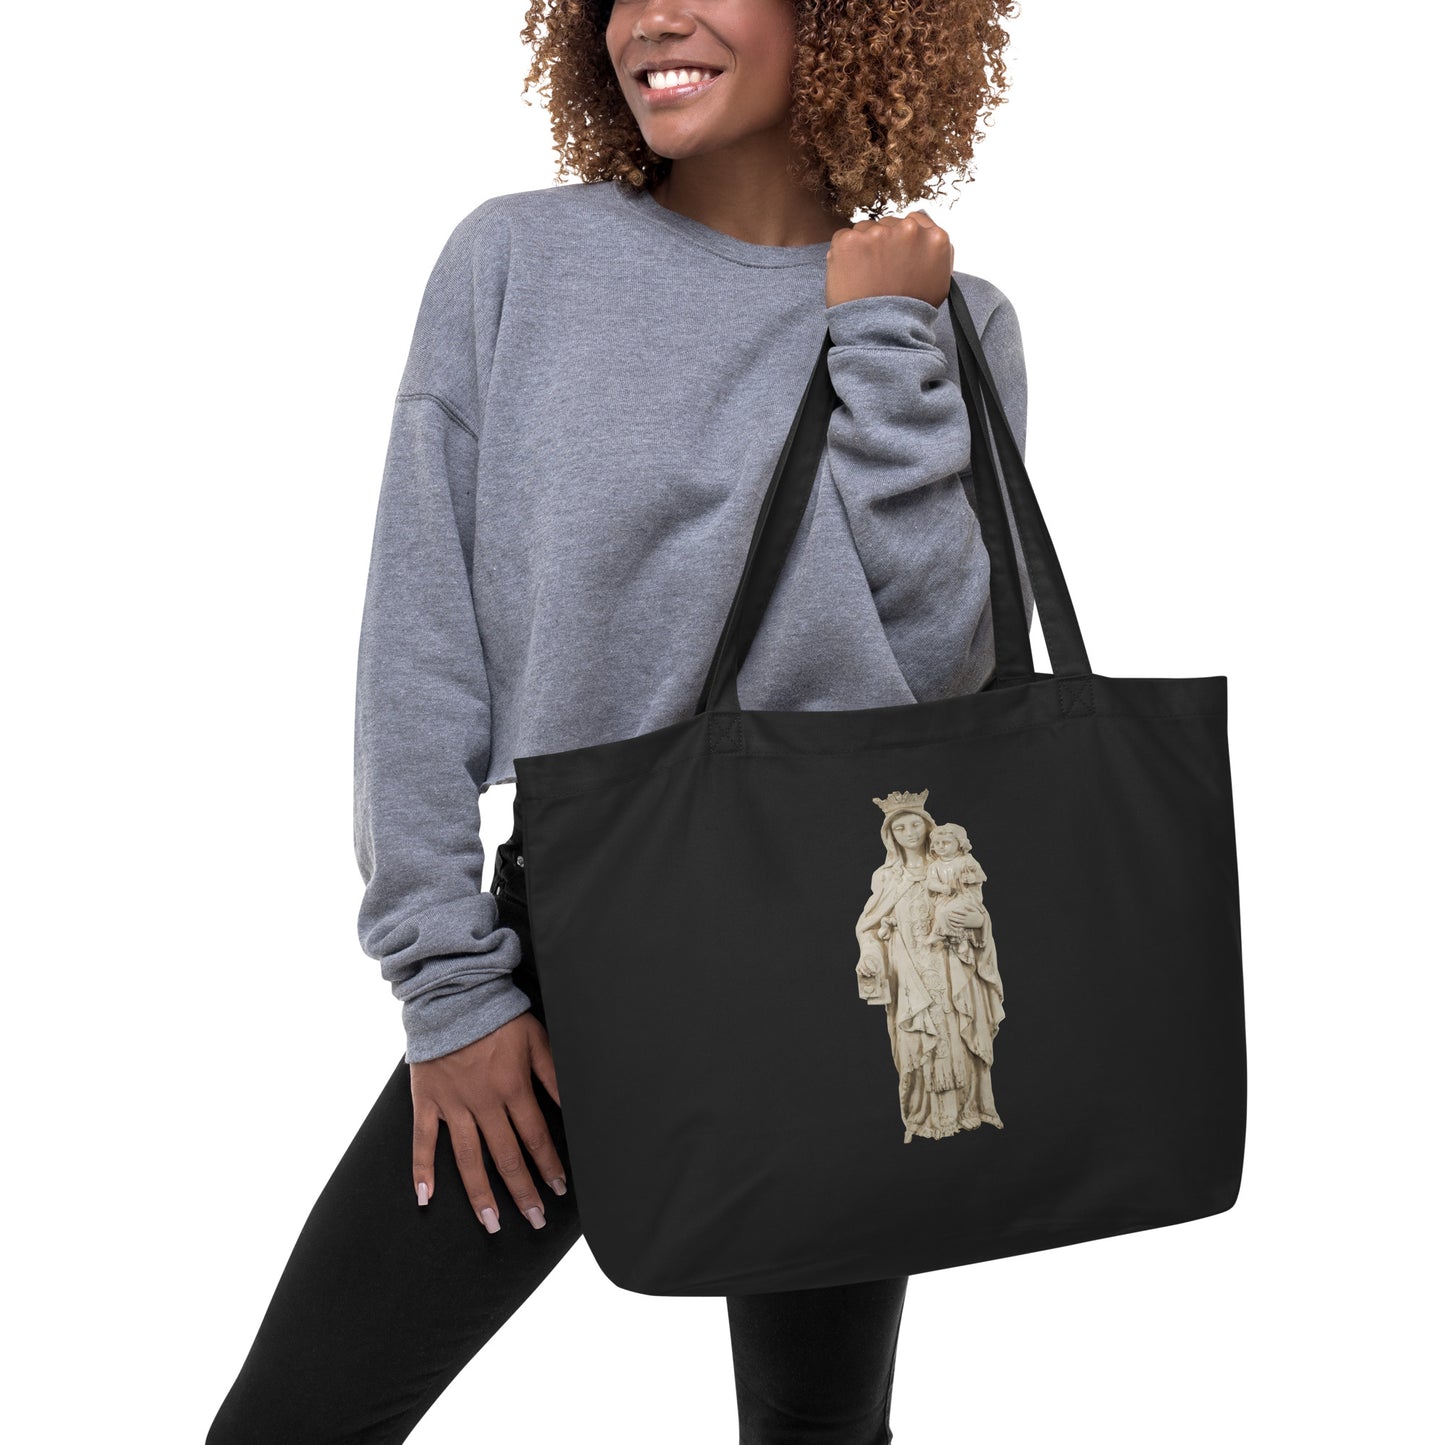 Images of Mary Large organic tote bag